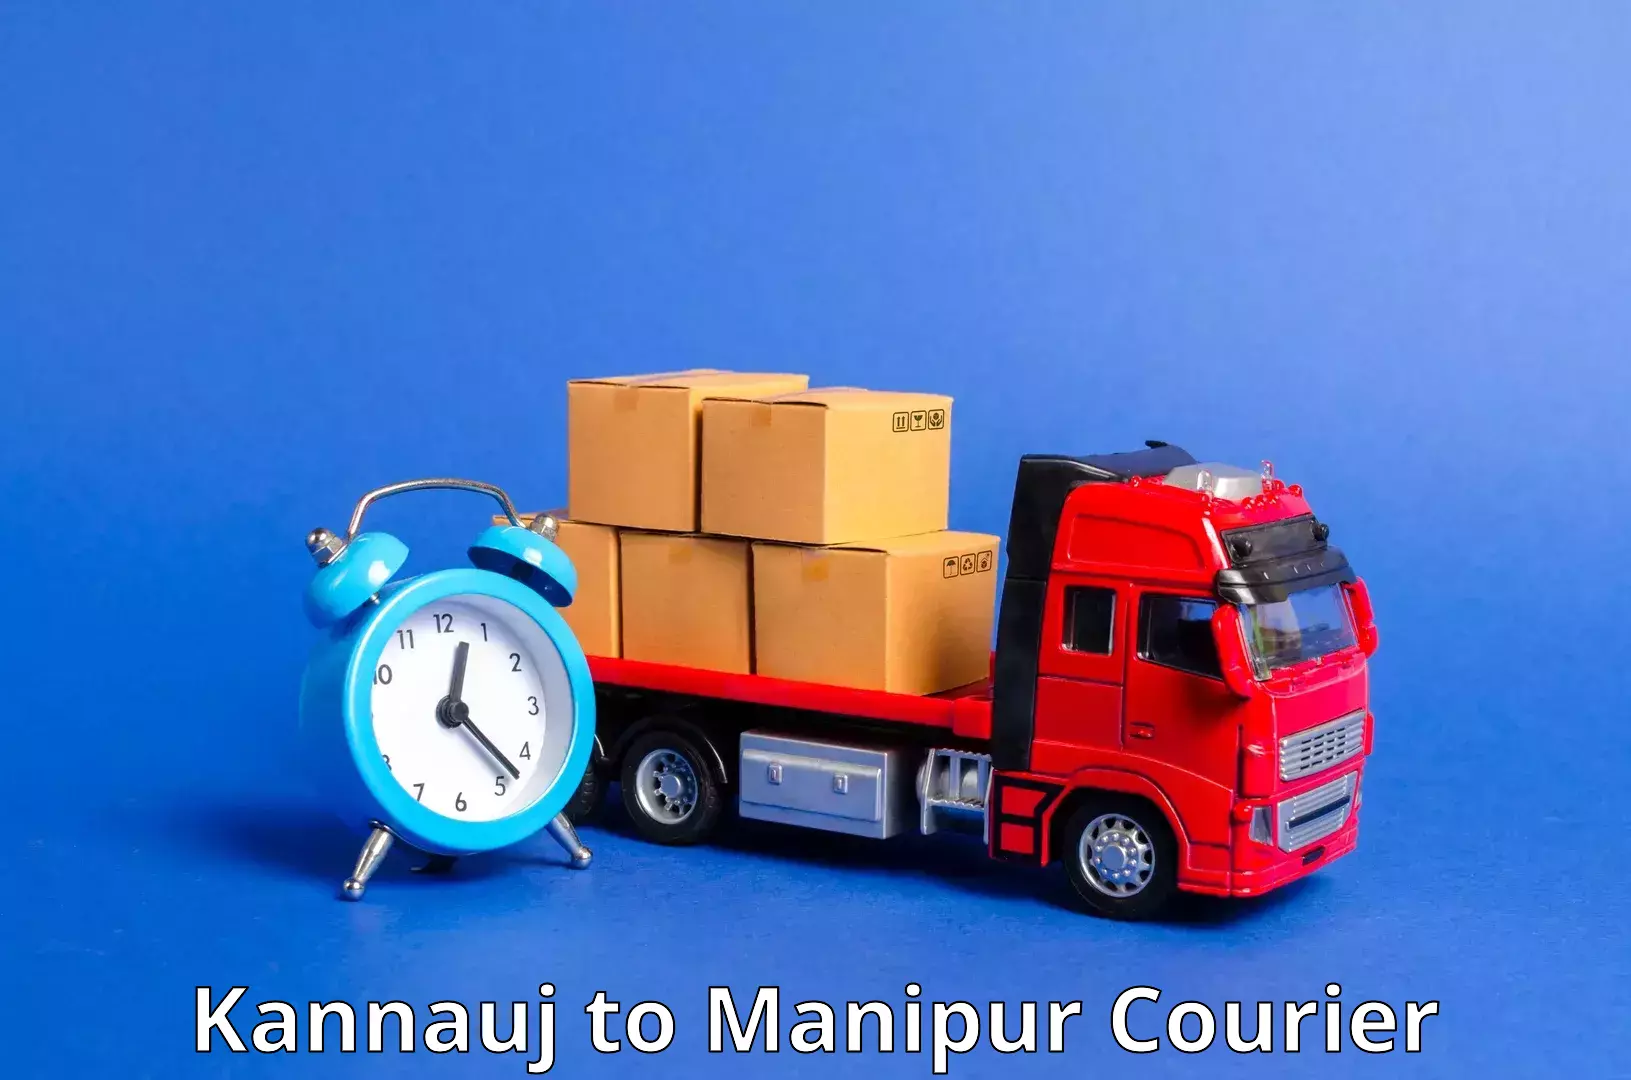 Next-day delivery options Kannauj to Imphal